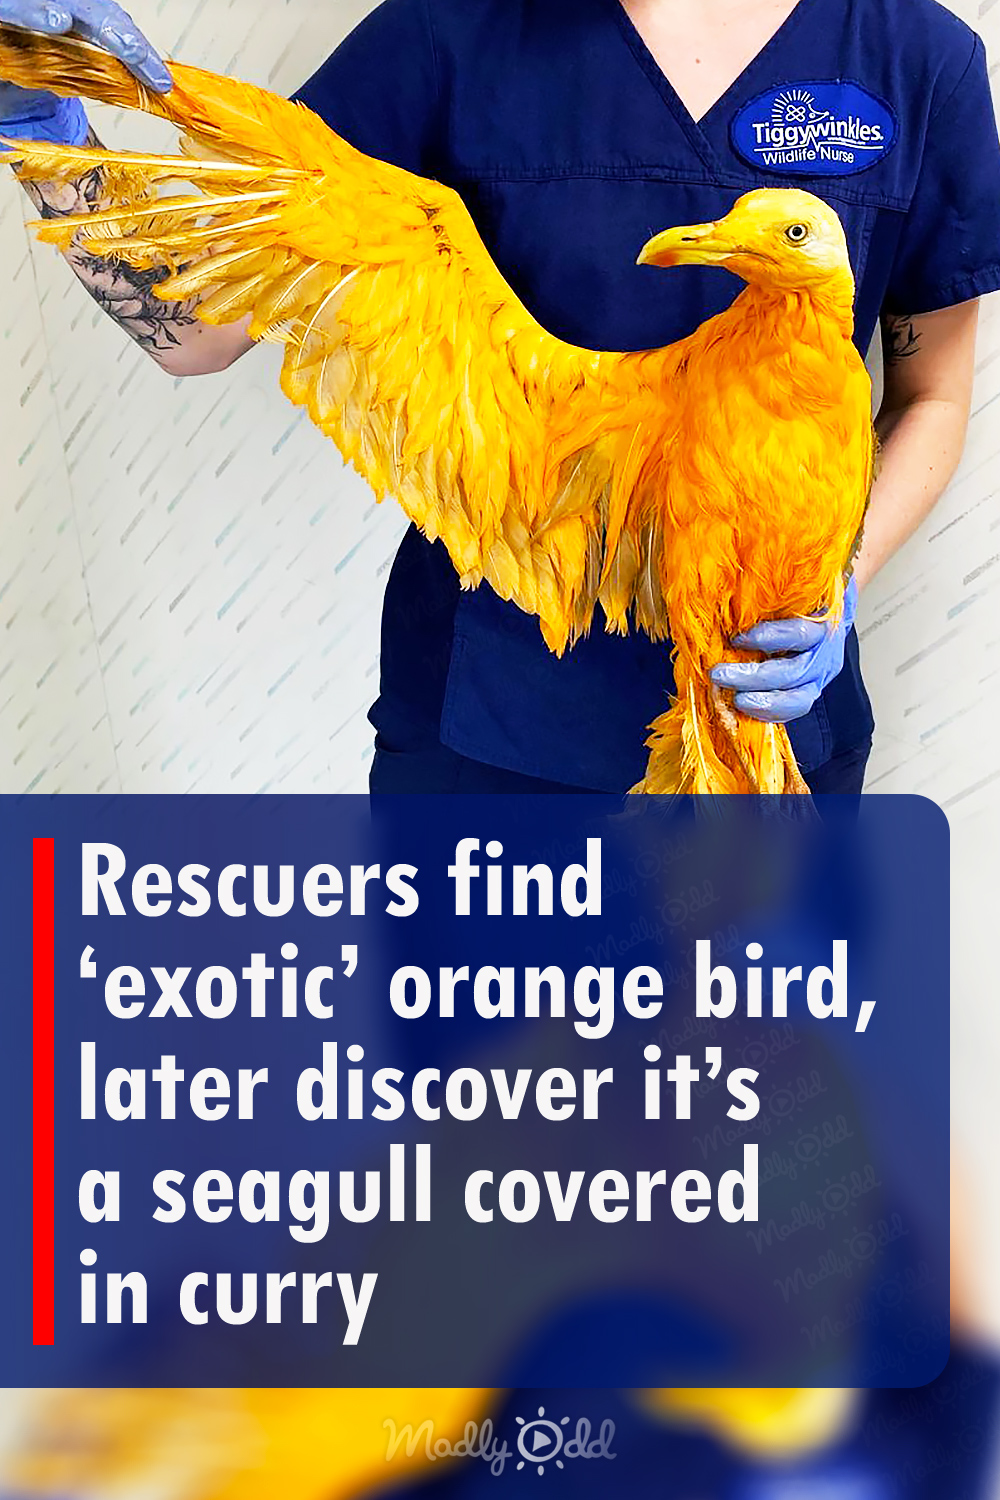 Rescuers find ‘exotic’ orange bird, later discover it’s a seagull covered in curry